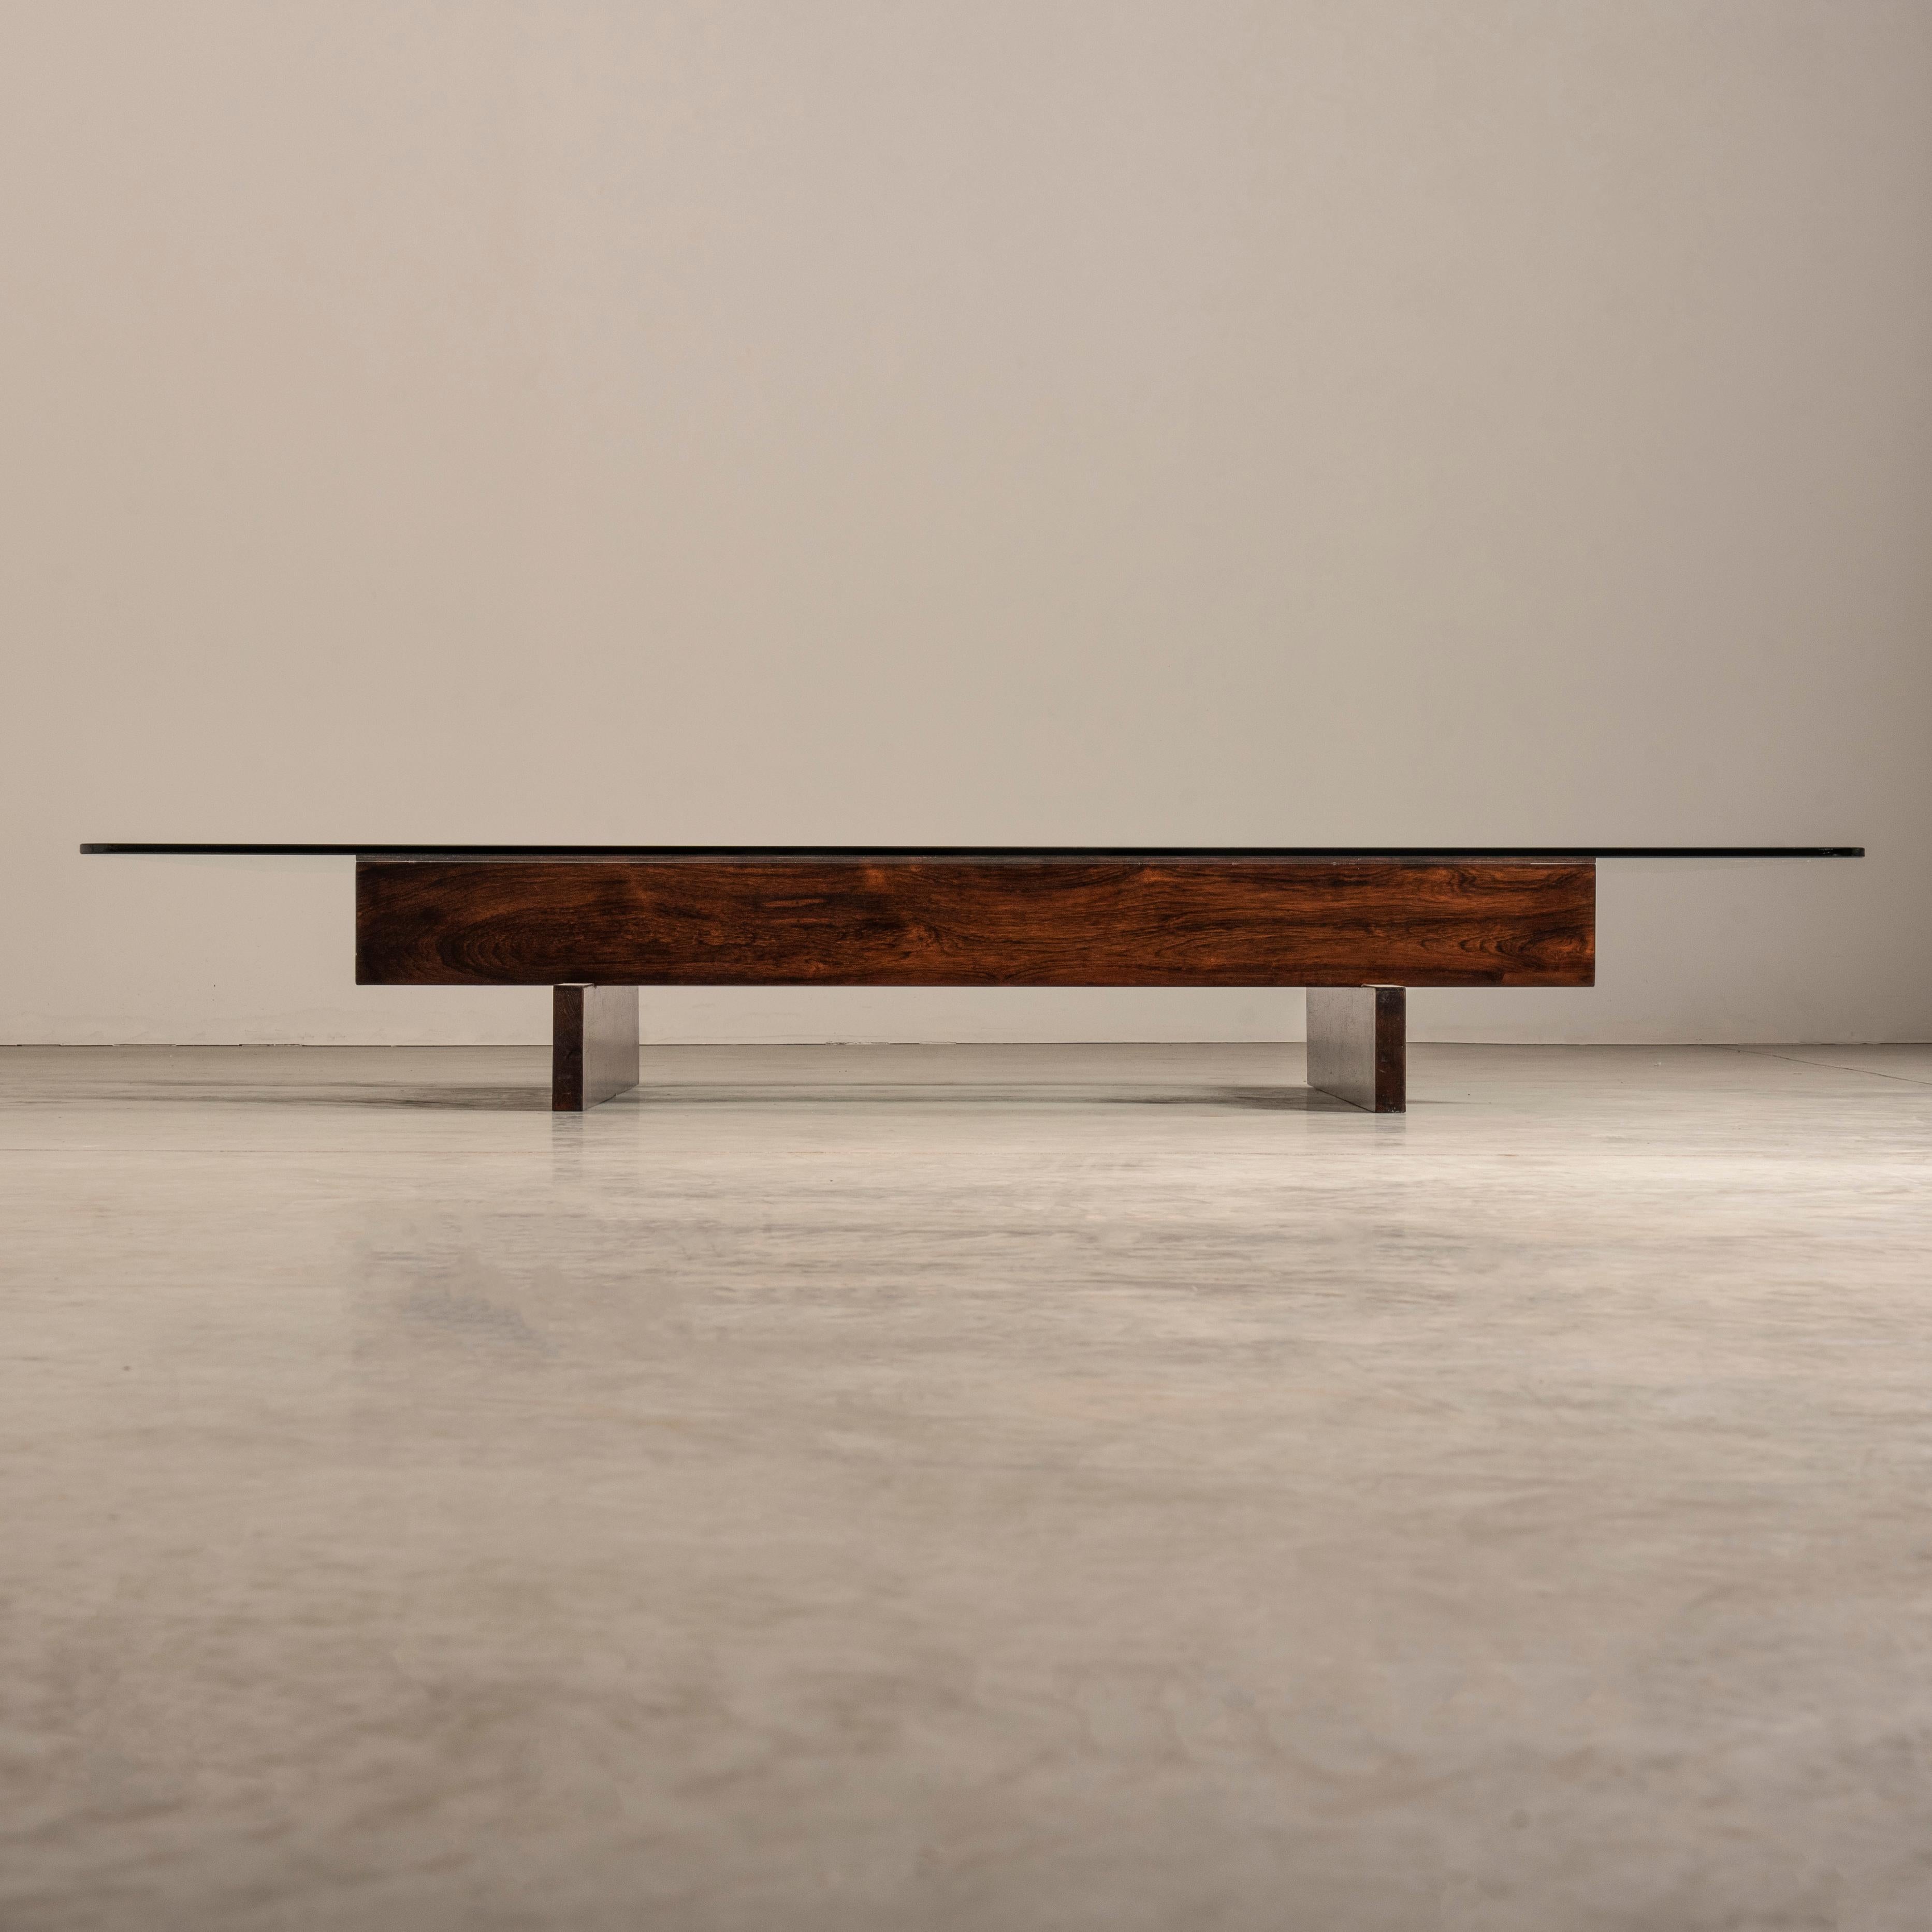 Introducing the coffee table by Celina Decorações, a sophisticated and elegant piece that exudes the typical charm of Brazilian mid-century design. With a wooden structure composed of solid slabs positioned on top of each other, and a rectangular